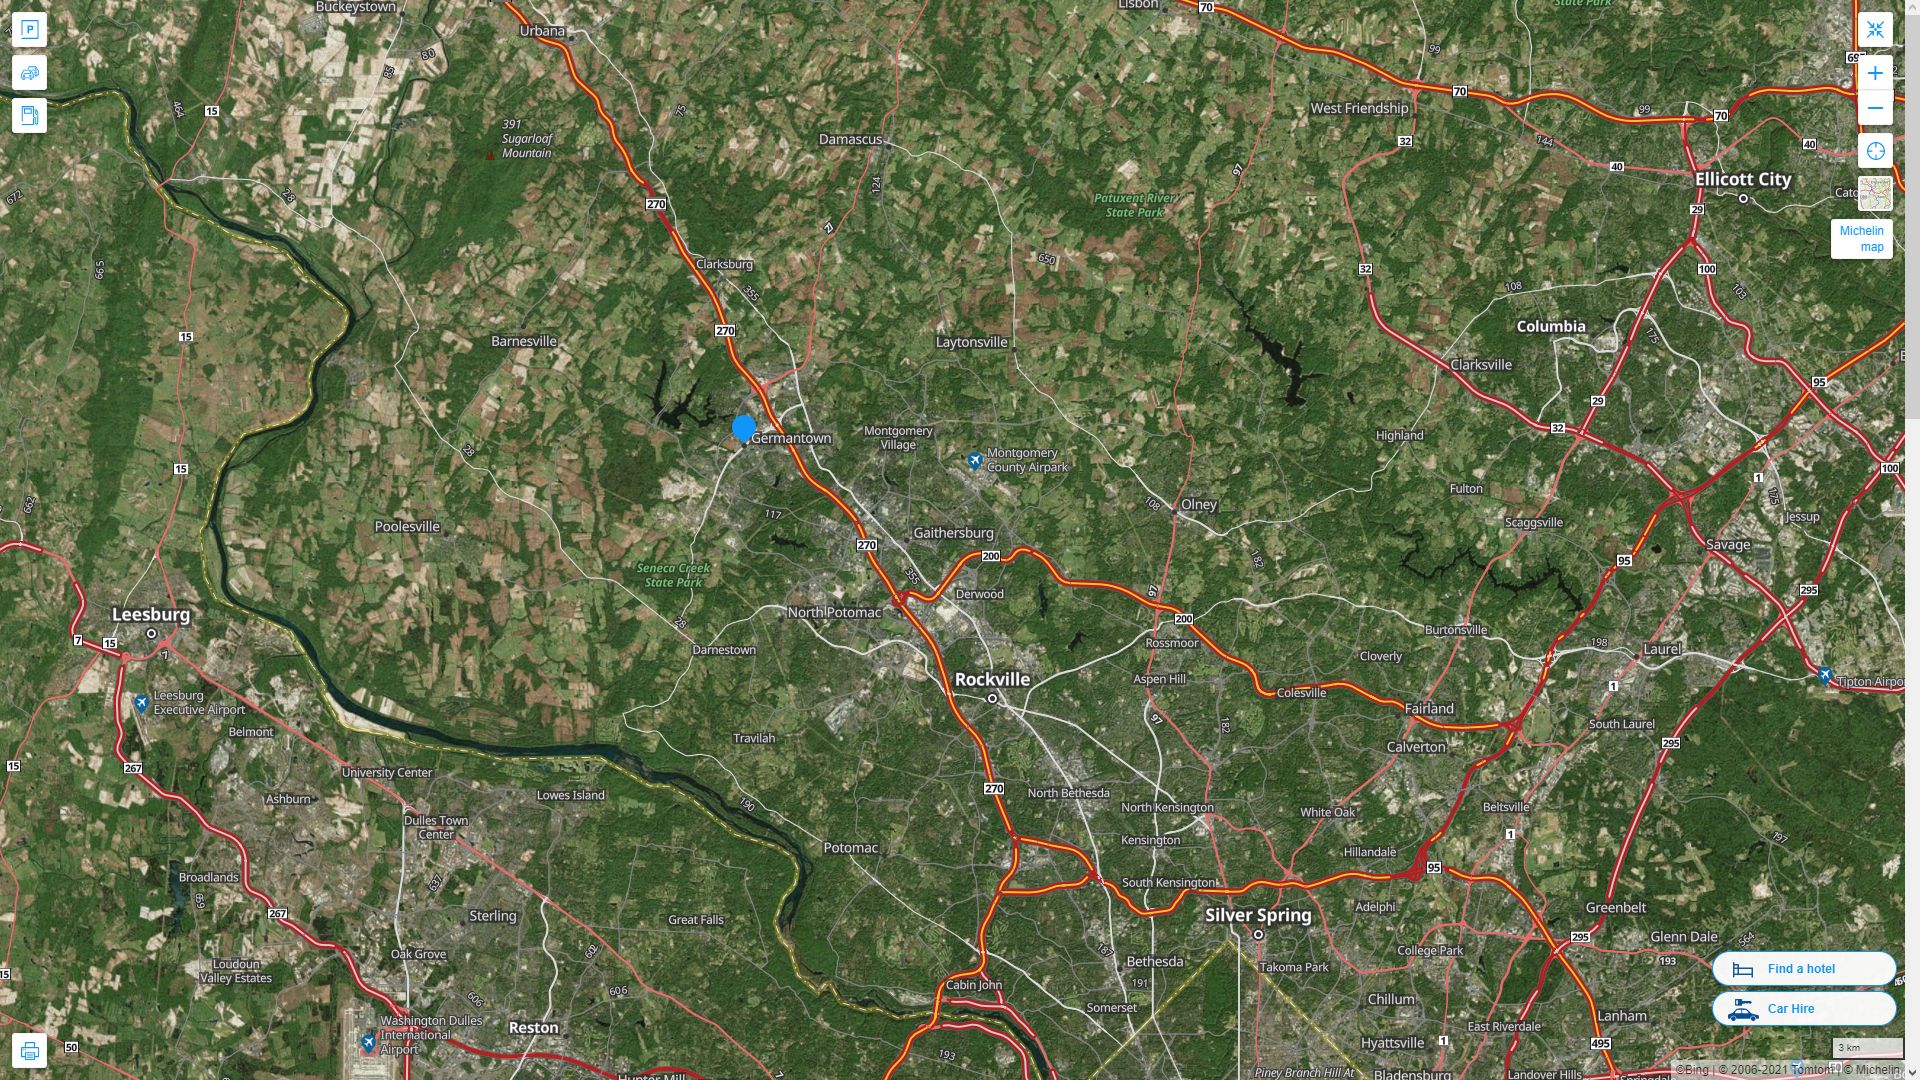 Germantown Maryland Highway and Road Map with Satellite View